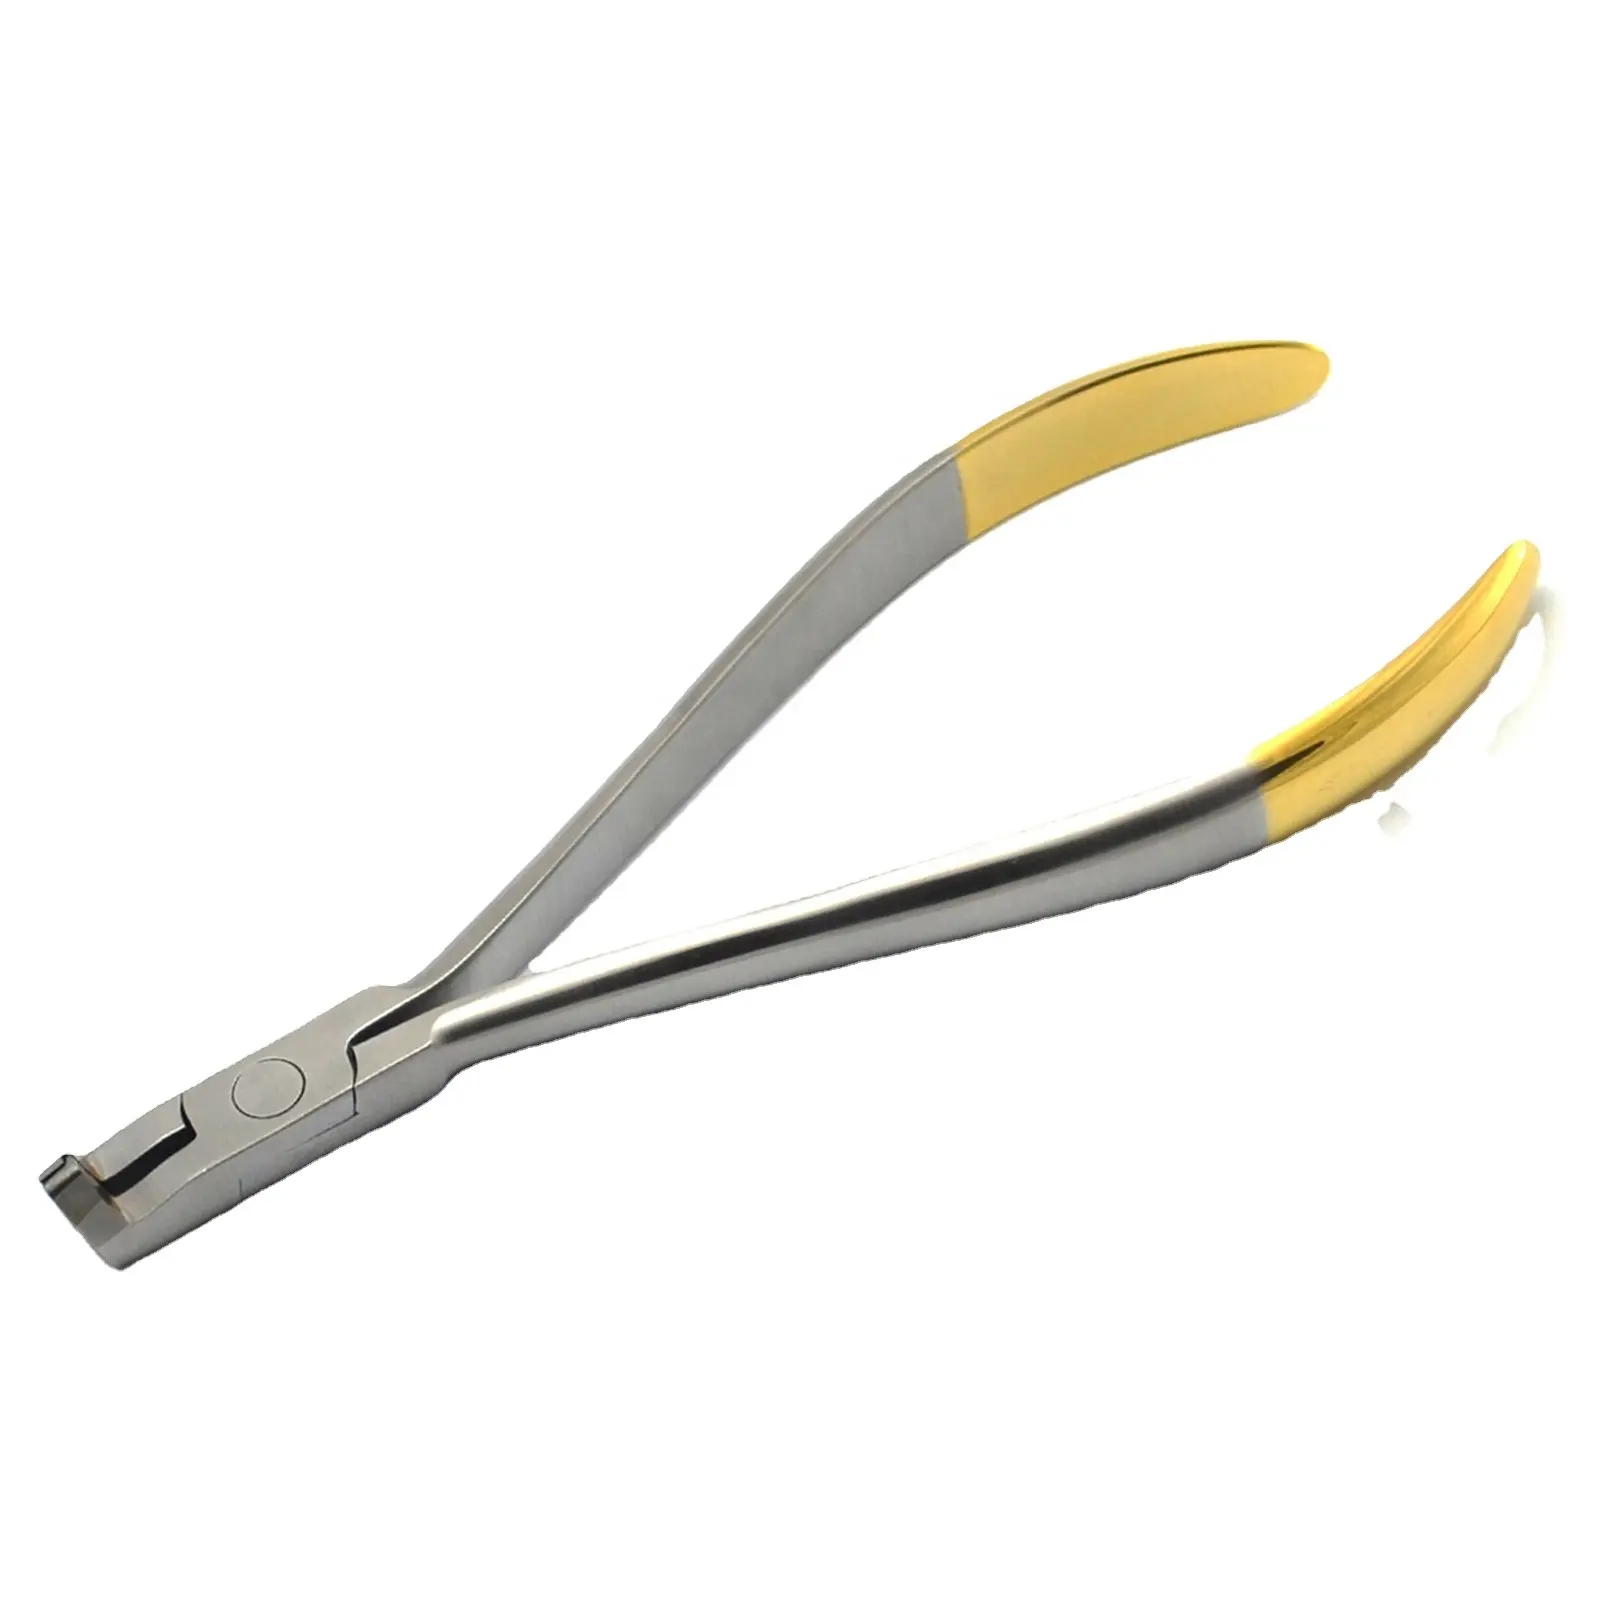 Hand cutting instruments in dentistry